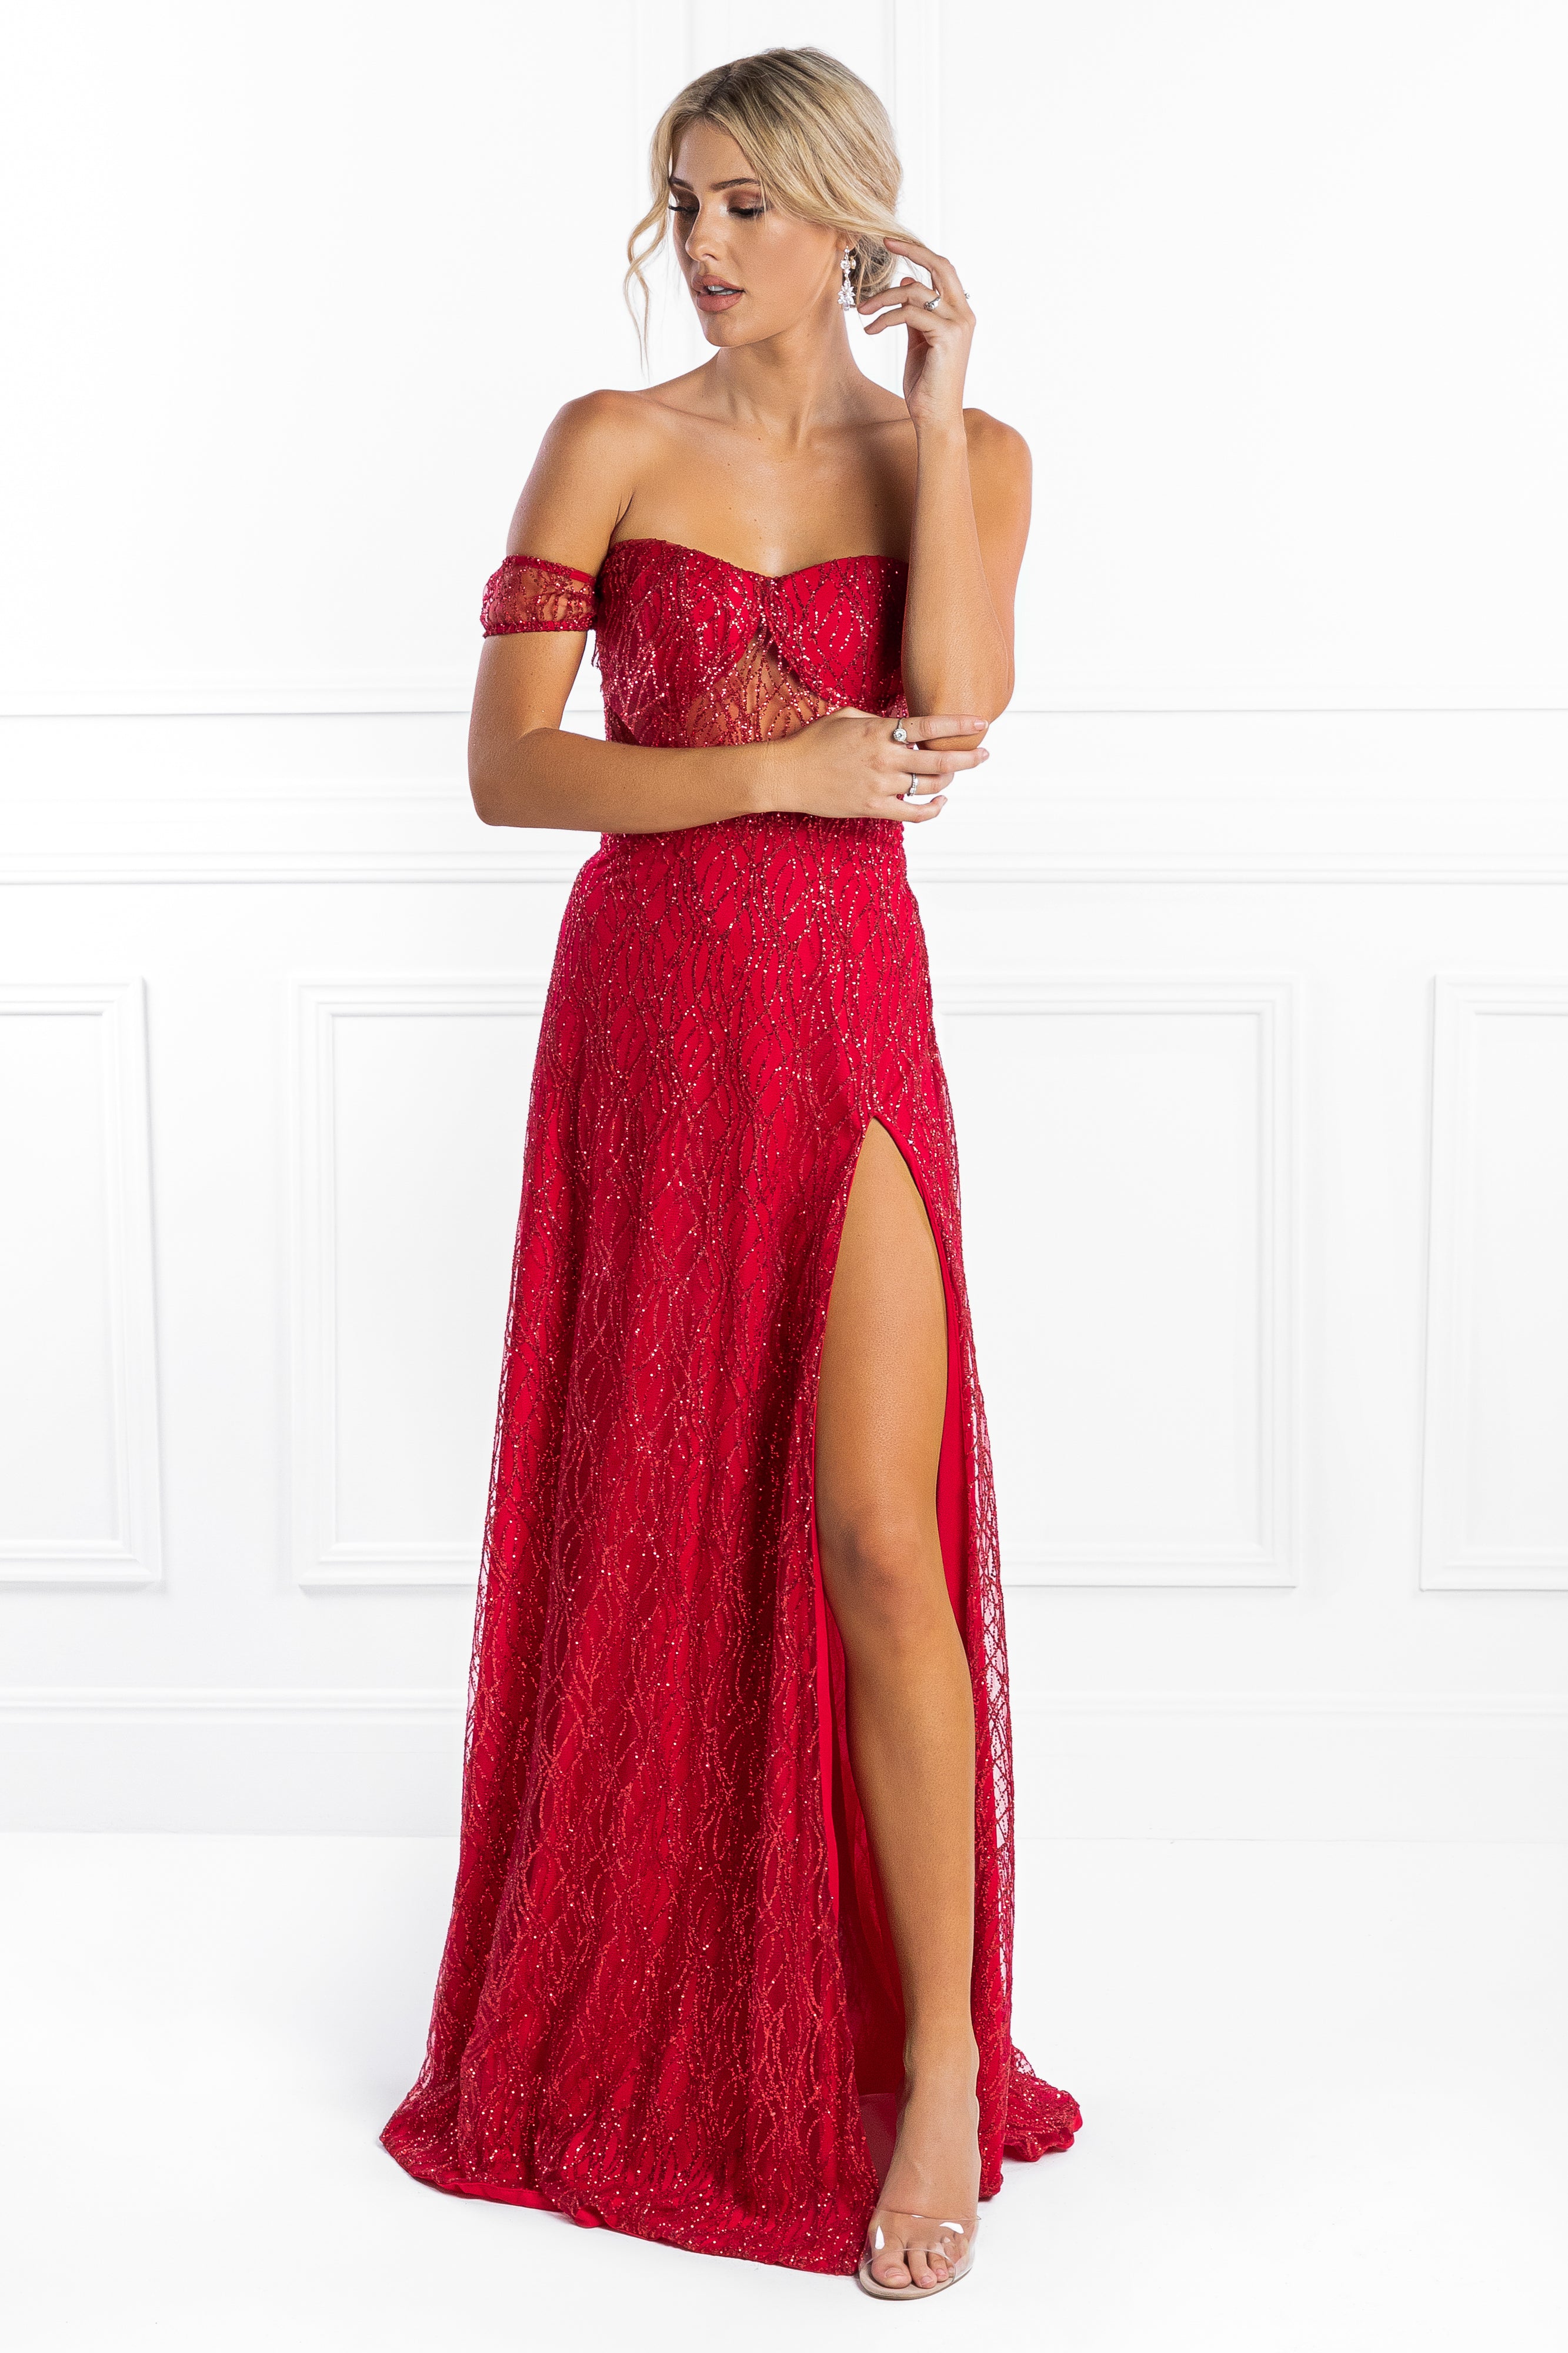 Honey Couture MARA Red Glitter One Sleeve Evening Gown Dress Honey Couture$ AfterPay Humm ZipPay LayBuy Sezzle